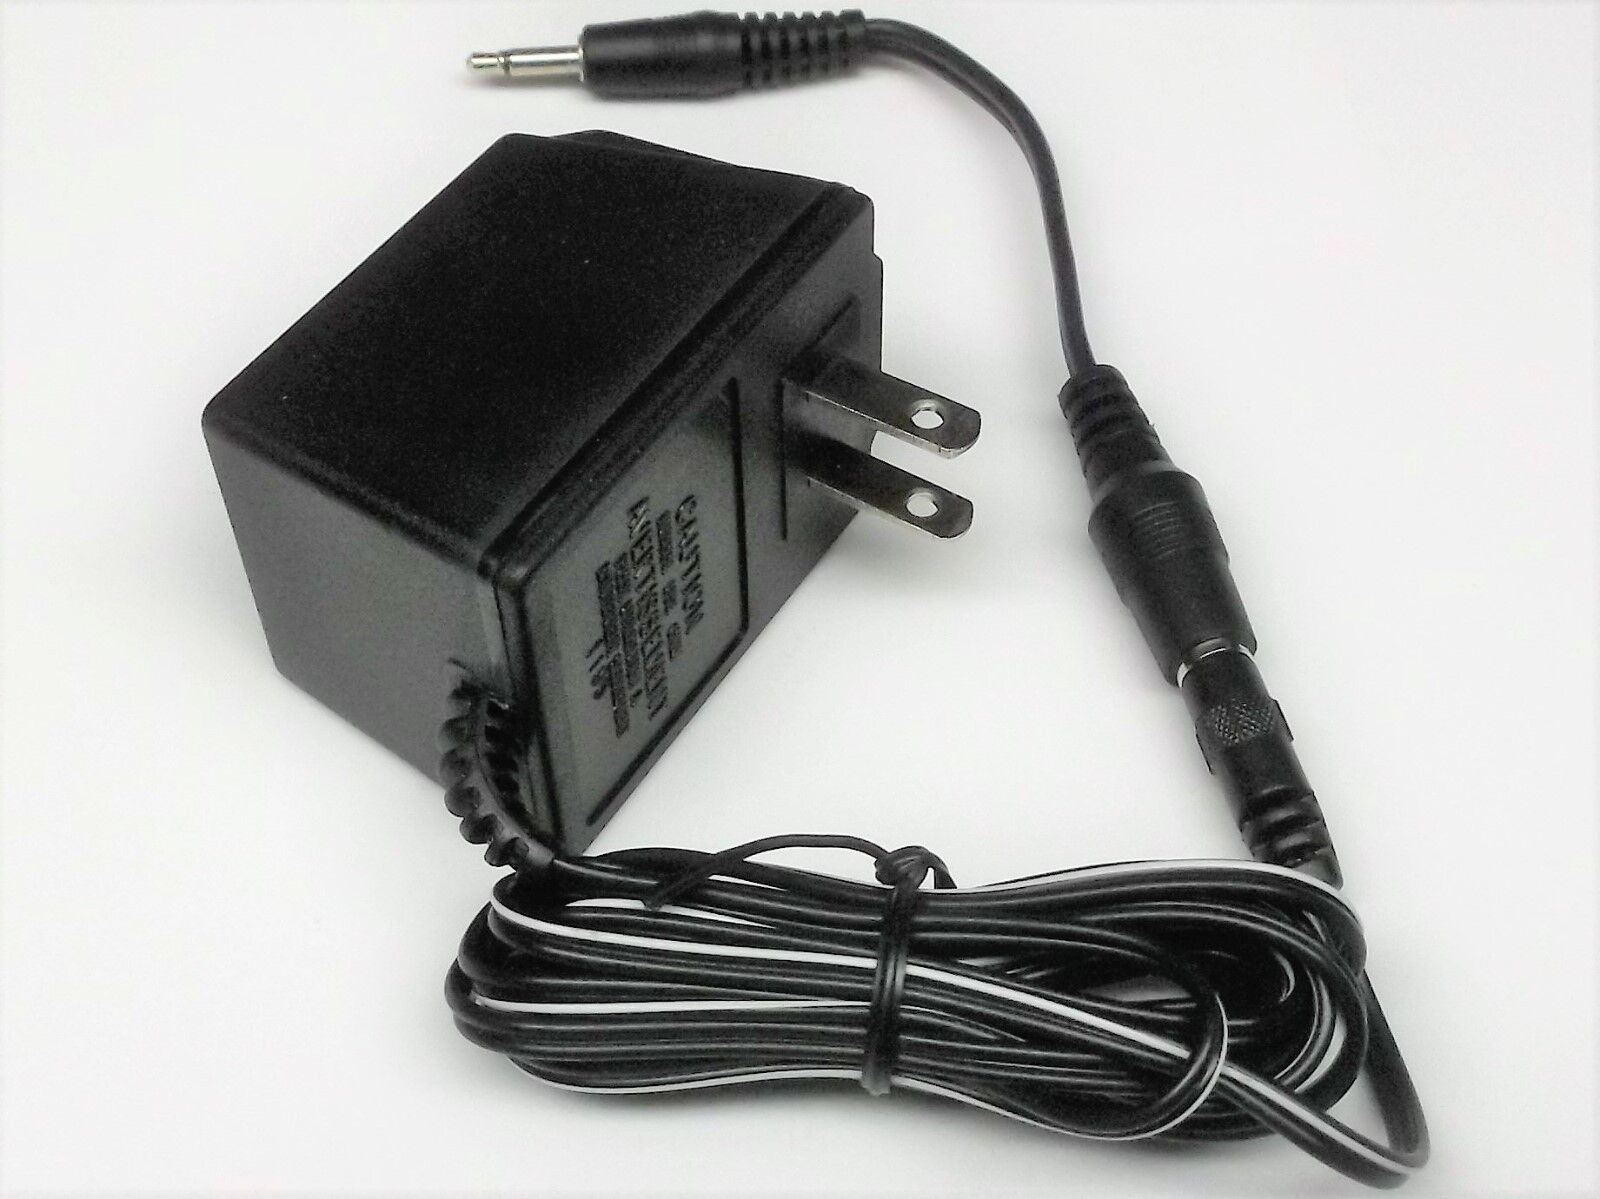 AC Adapter Power Supply For MEGO 2XL Talking Robot 8 Track Tape Cord Brand Power Supply Modification Description Added